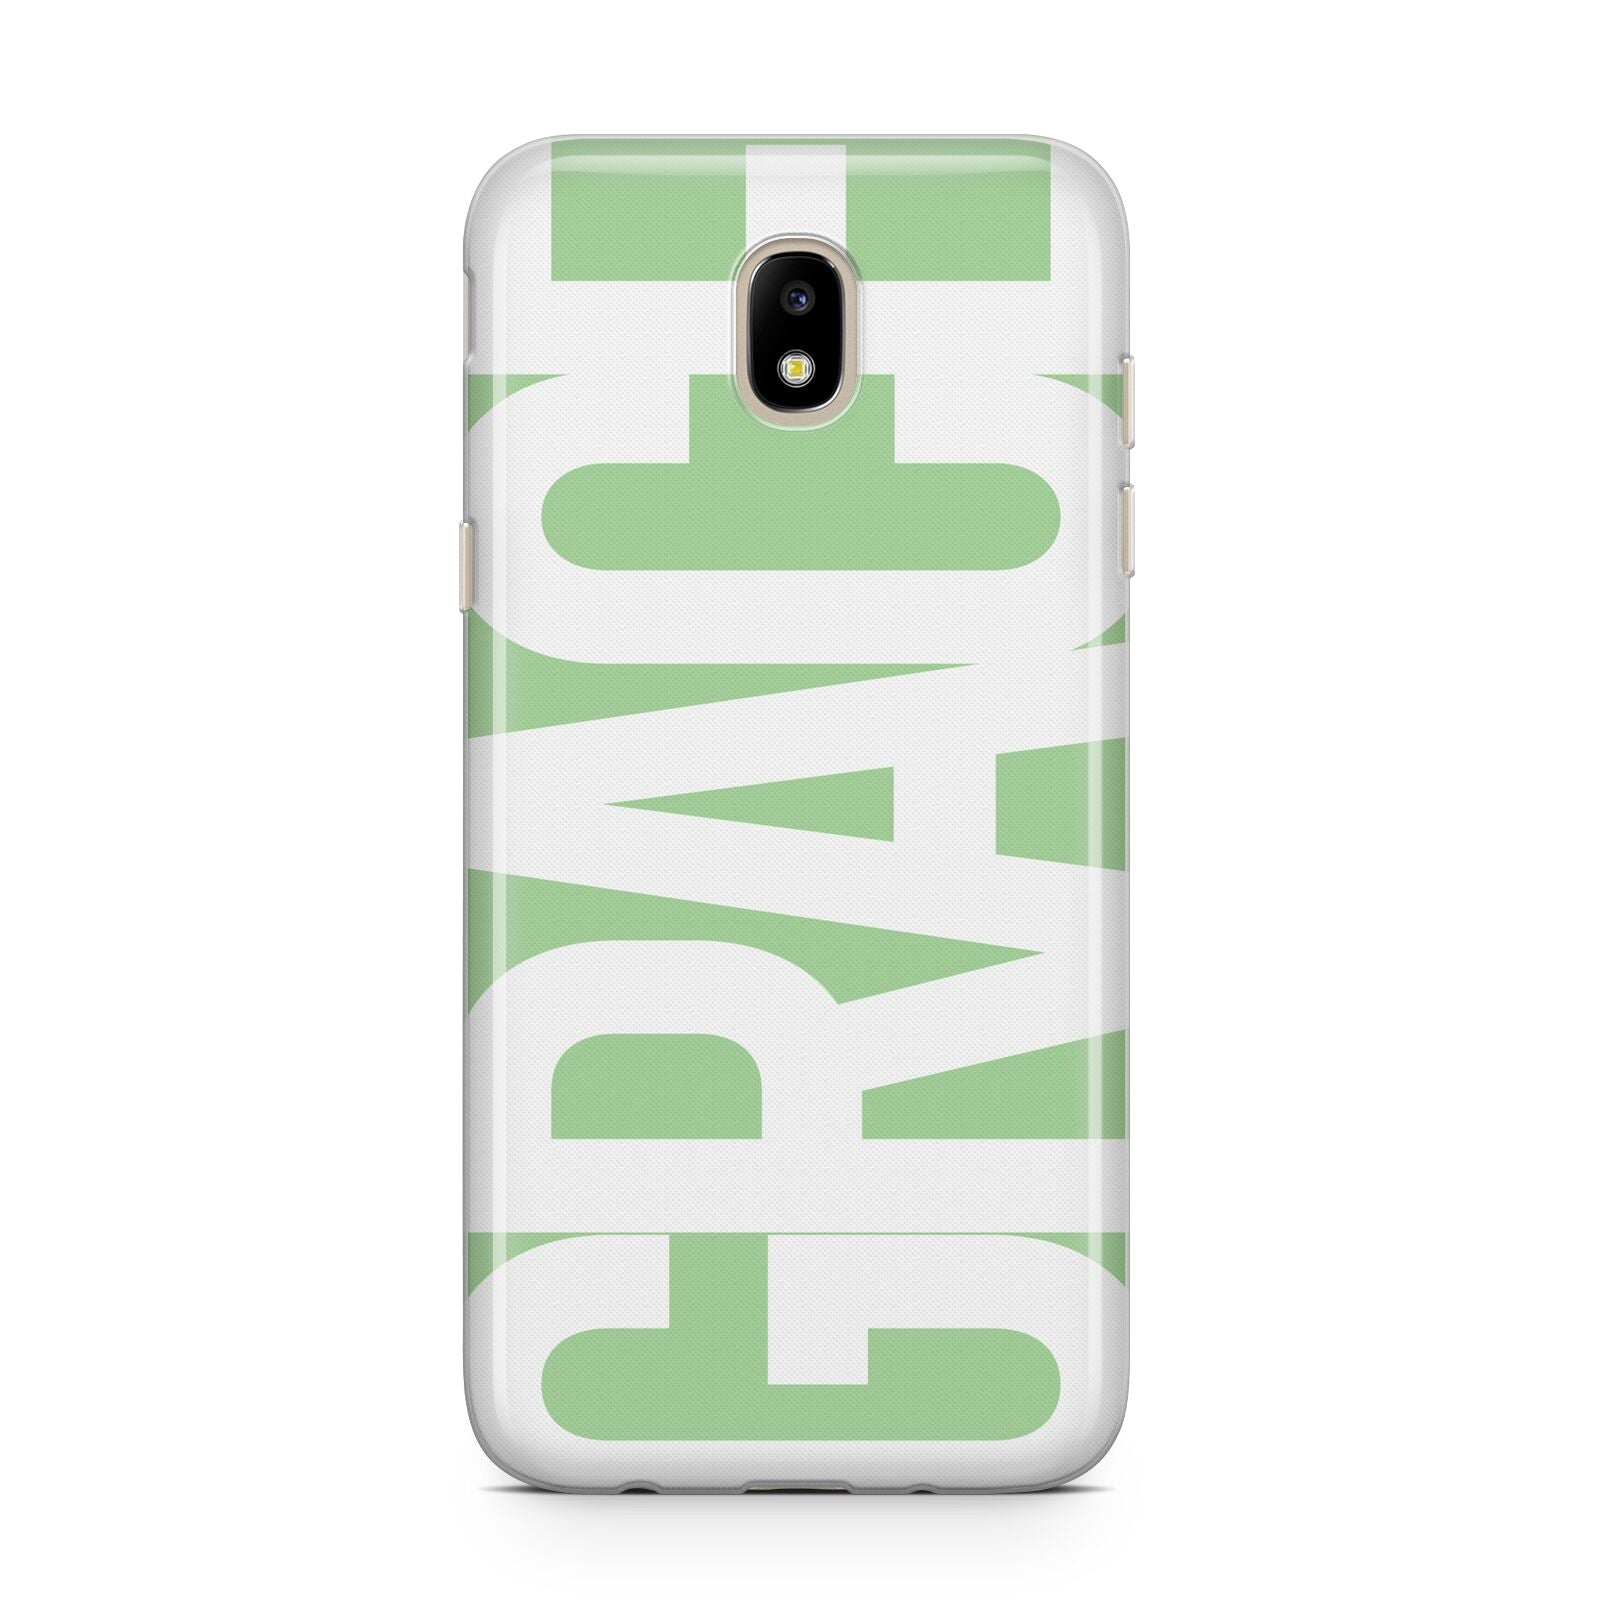 Pale Green with Bold White Text Samsung J5 2017 Case